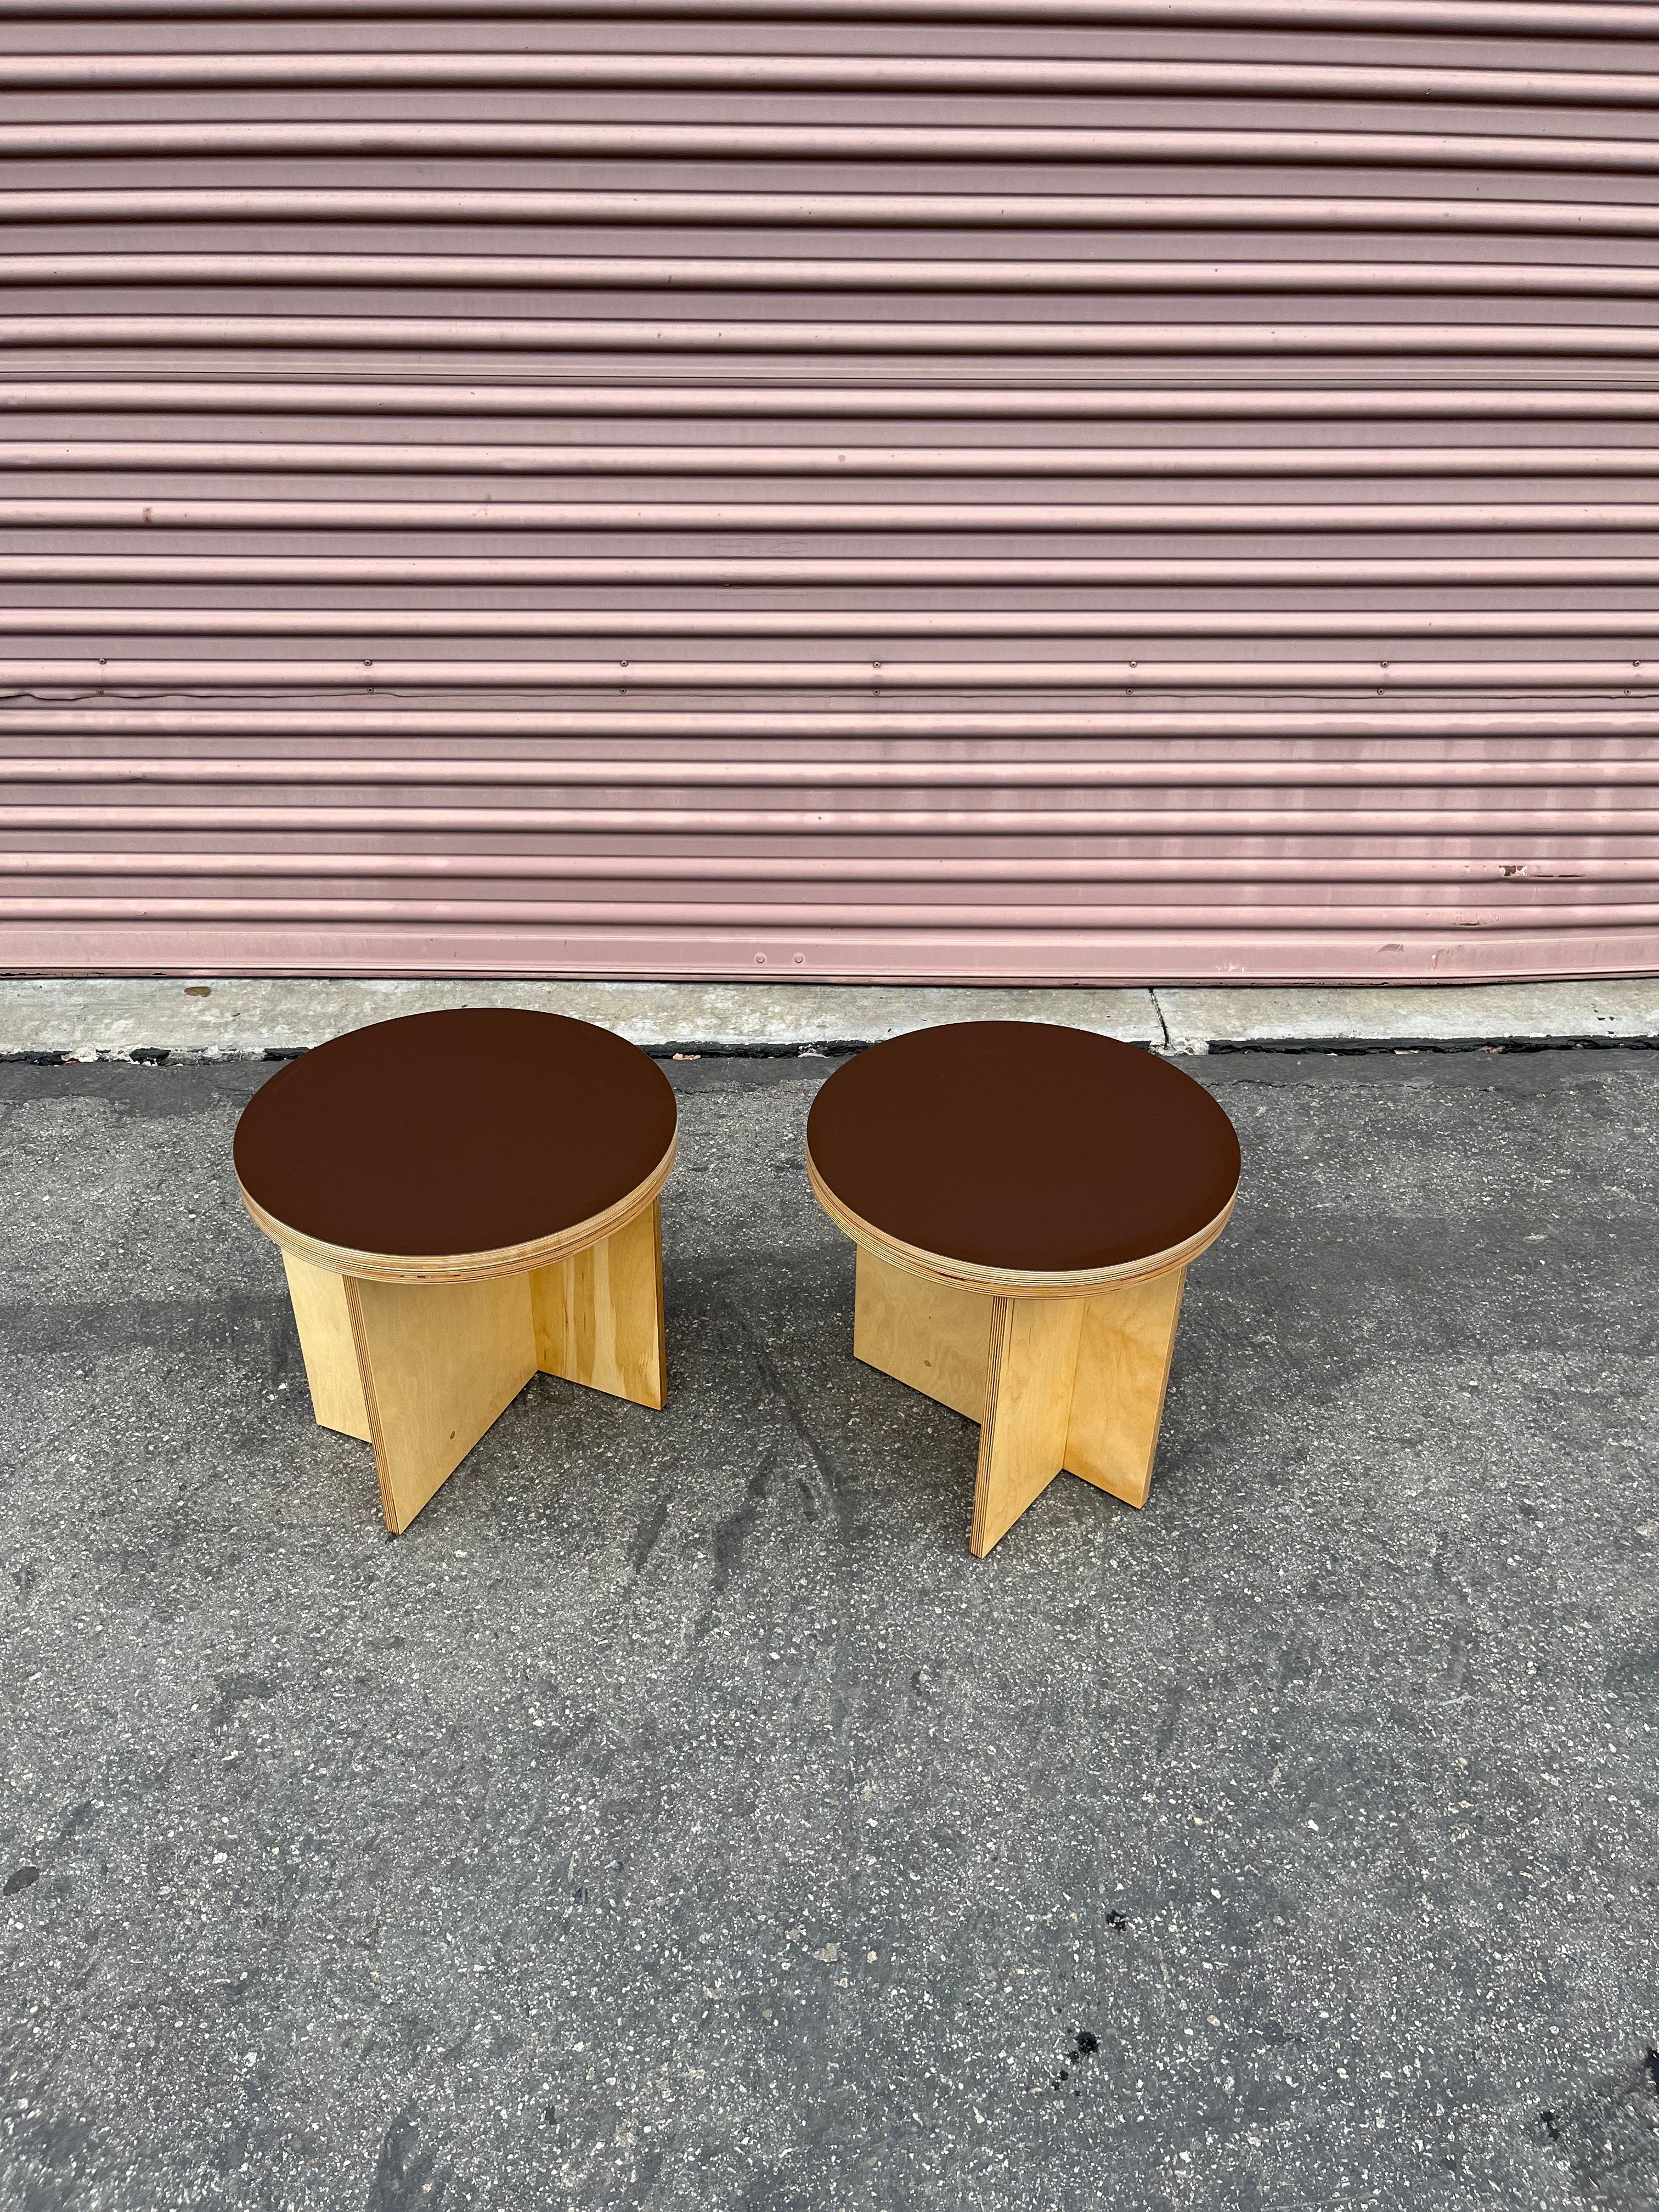  Round Offset Stools - Brown product image 2